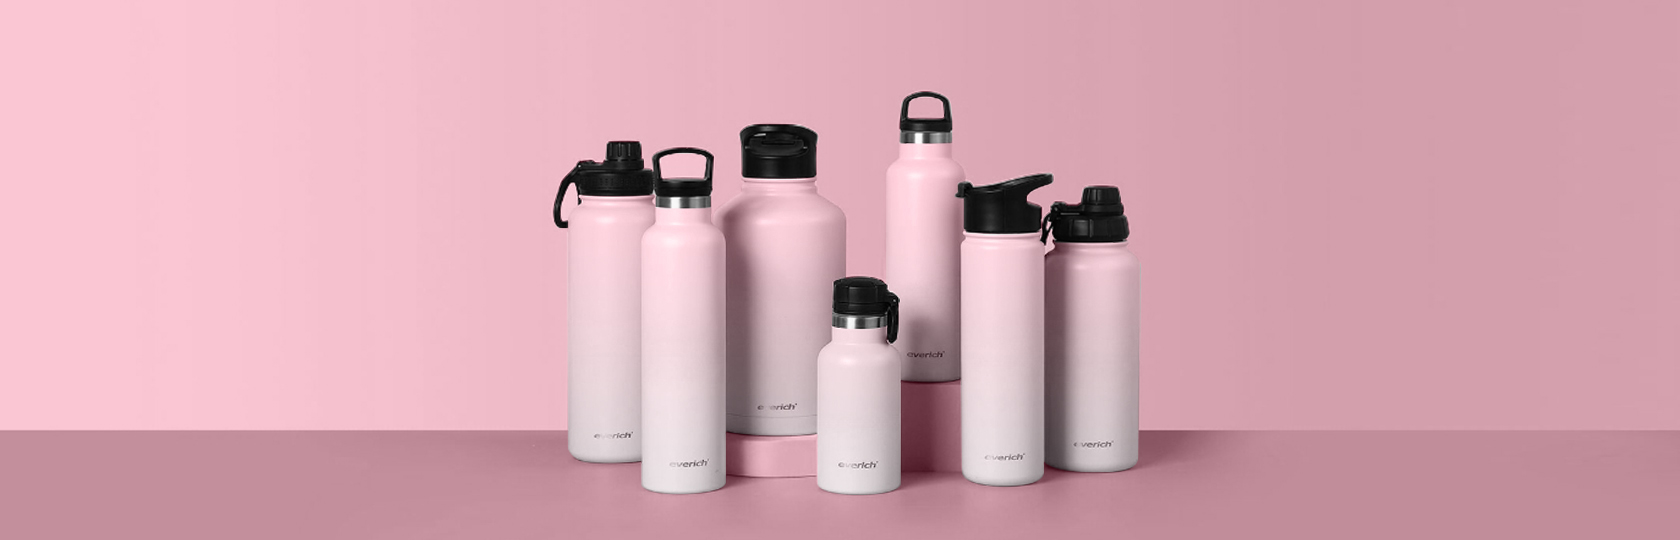 Insulated Water Bottles Manufacturer in china